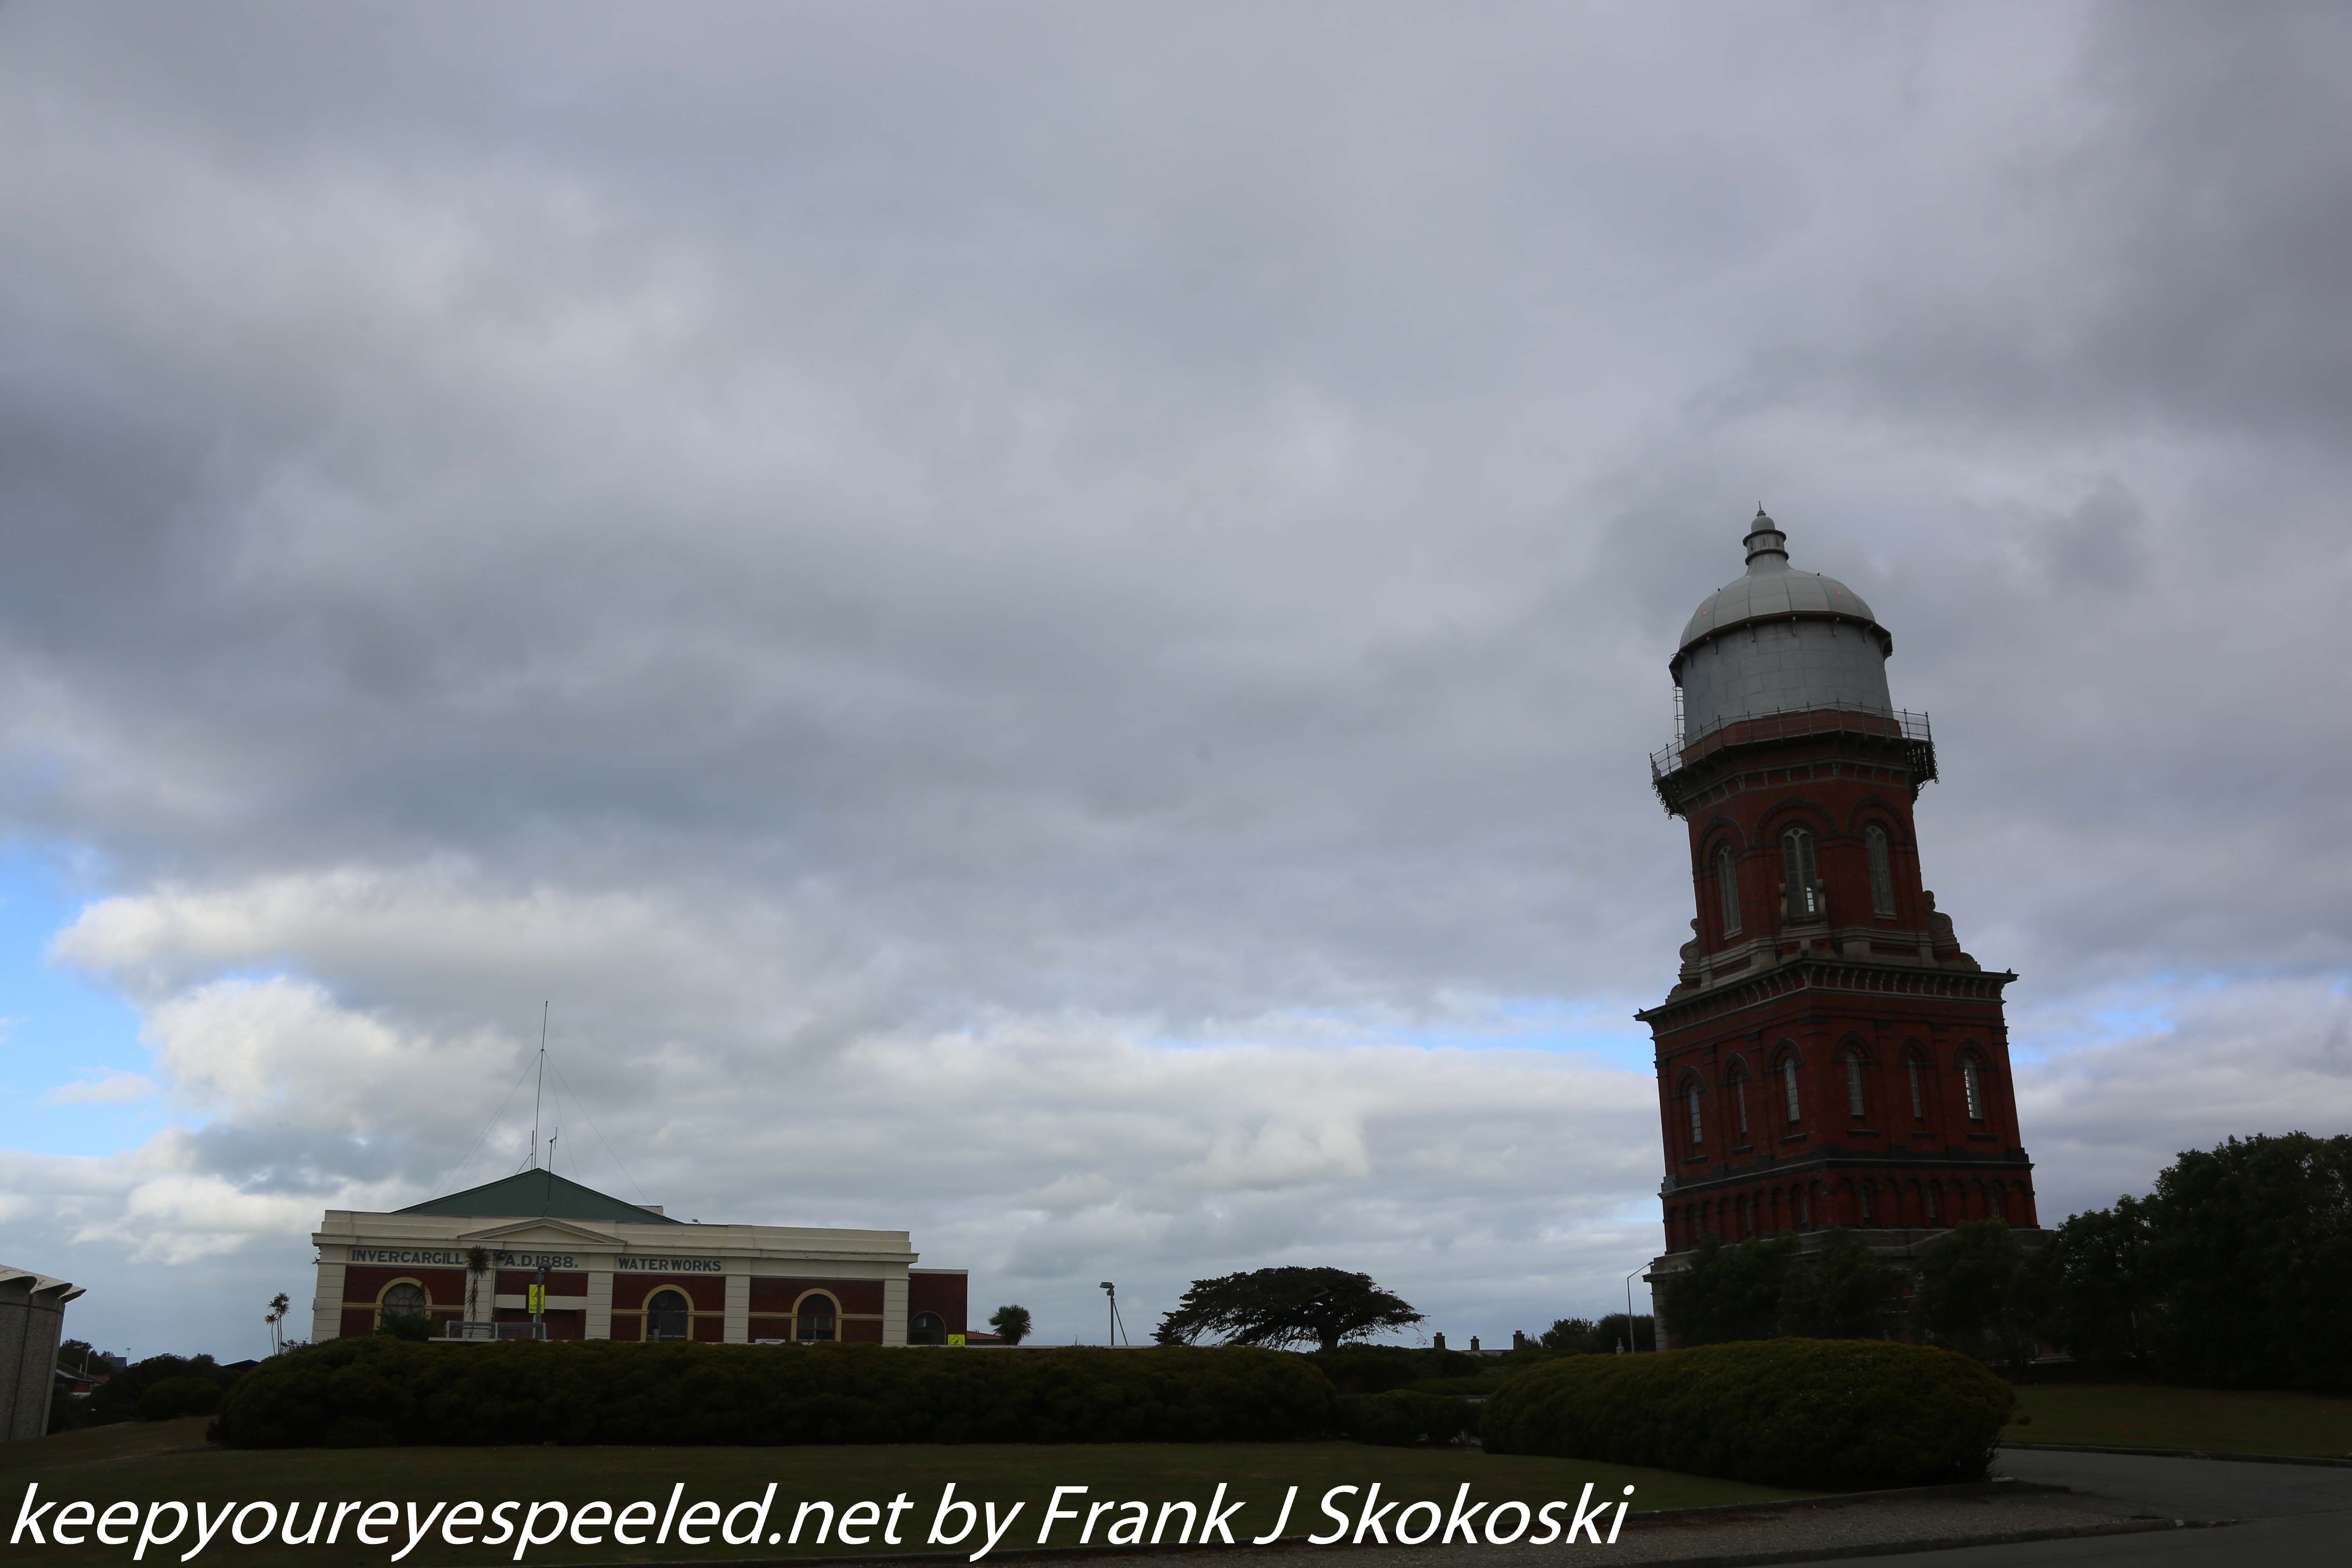 New-Zealand-Day-Eleven-Invercargill-39-of-50